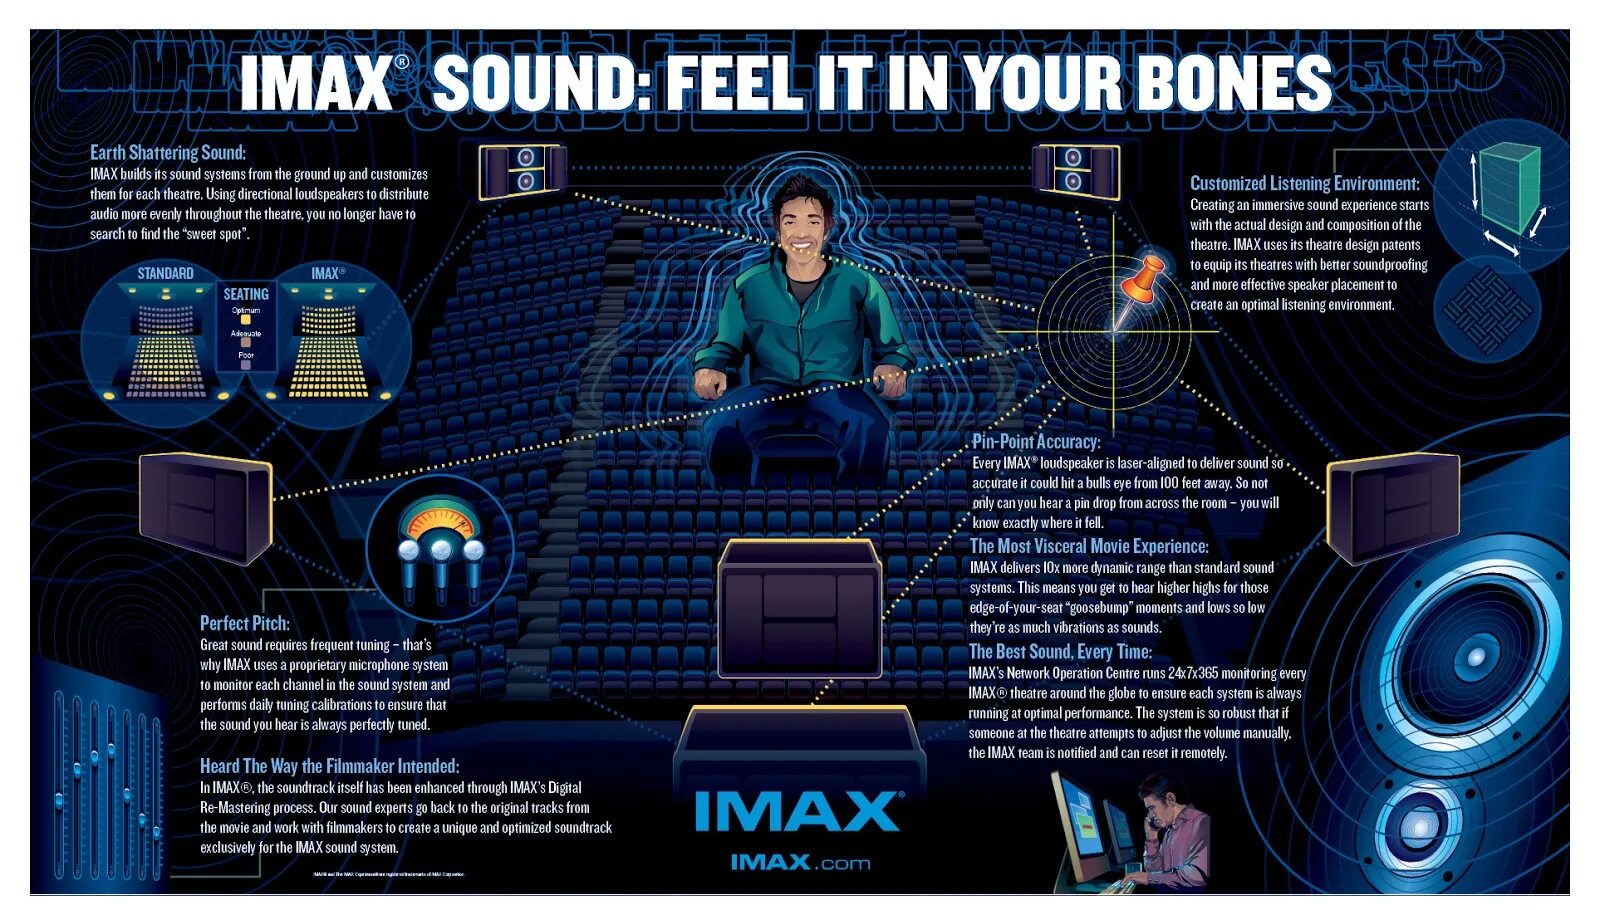 More 1 audio. Камера IMAX 3d. Формат камеры IMAX. IMAX with Laser. Optimized for IMAX Theatres.